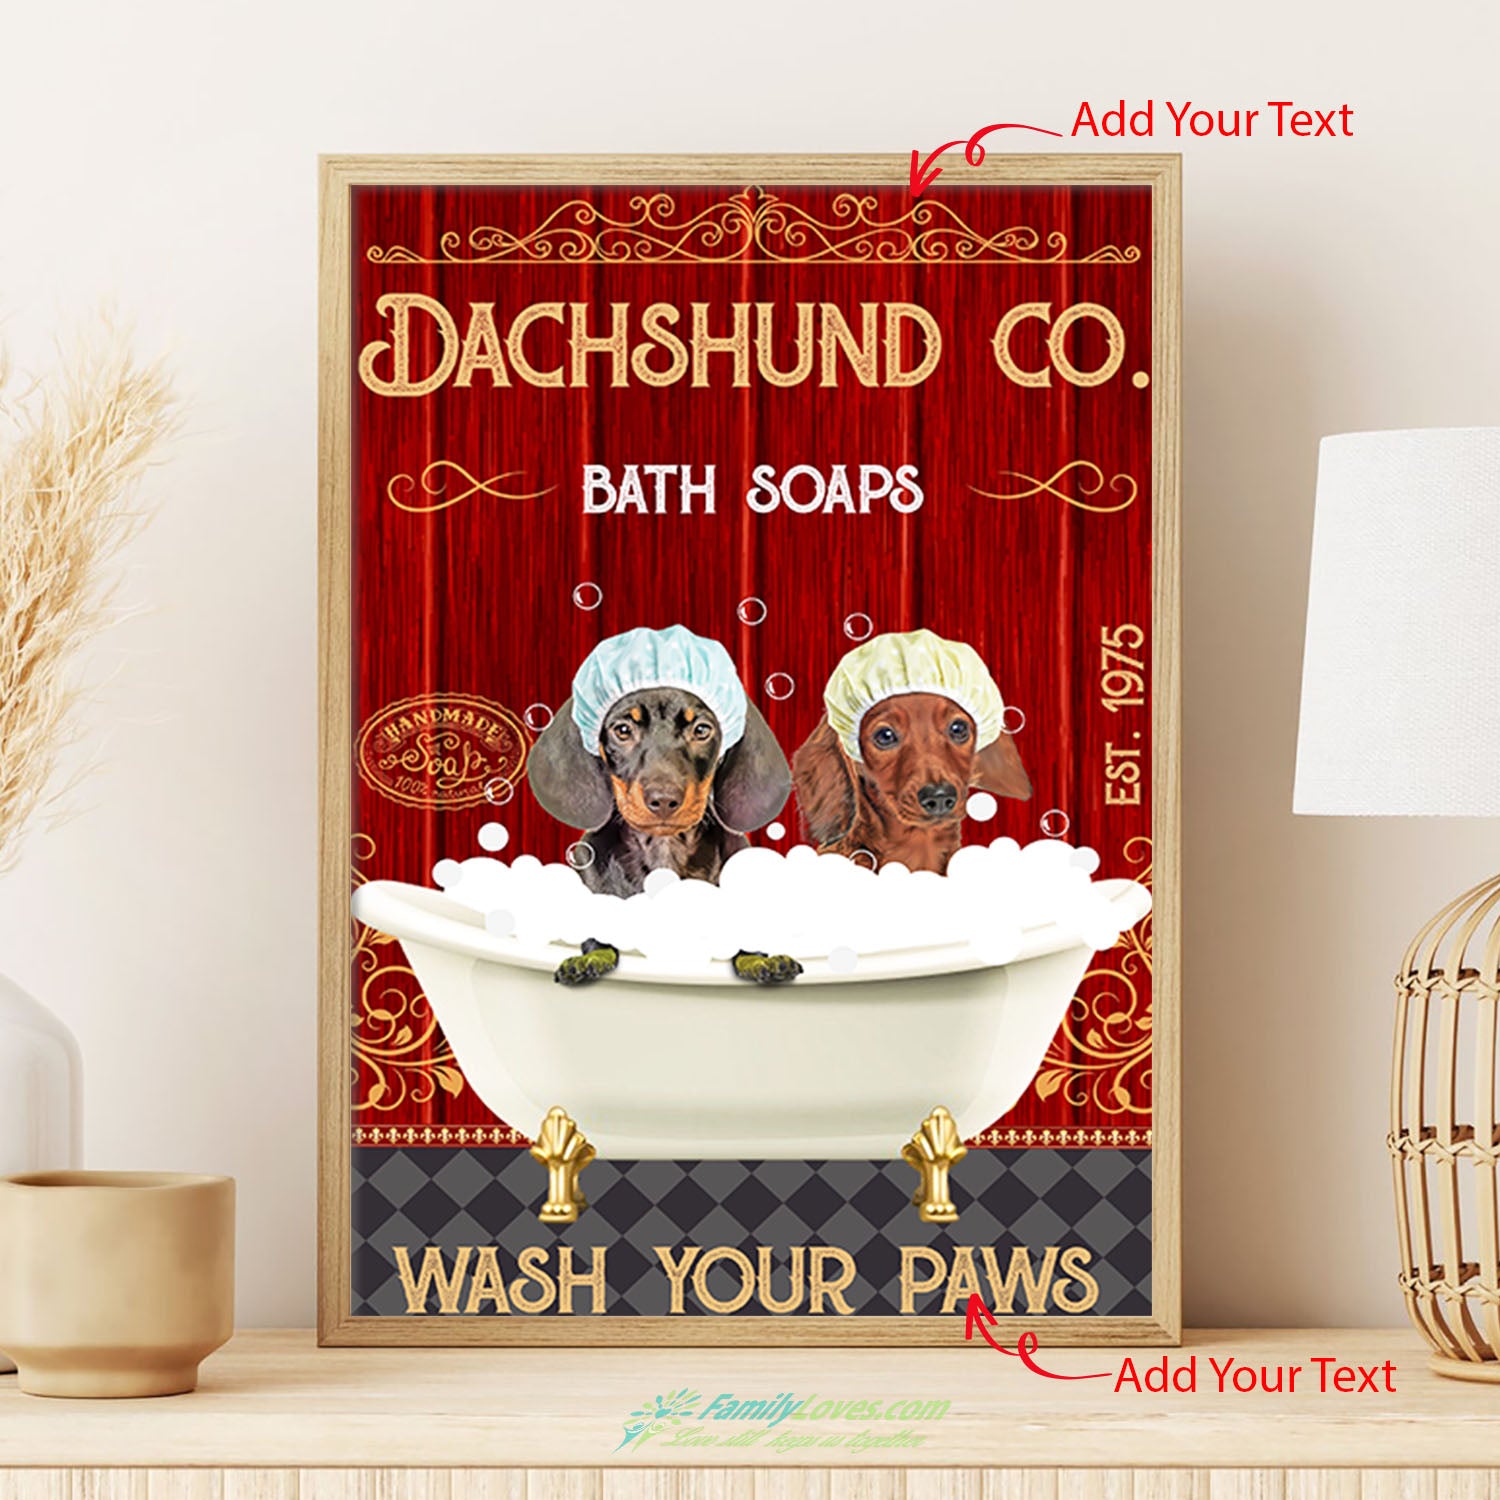 Dachshund Co Bath Soaps Canvas 16X20 Poster Mount All Size 1